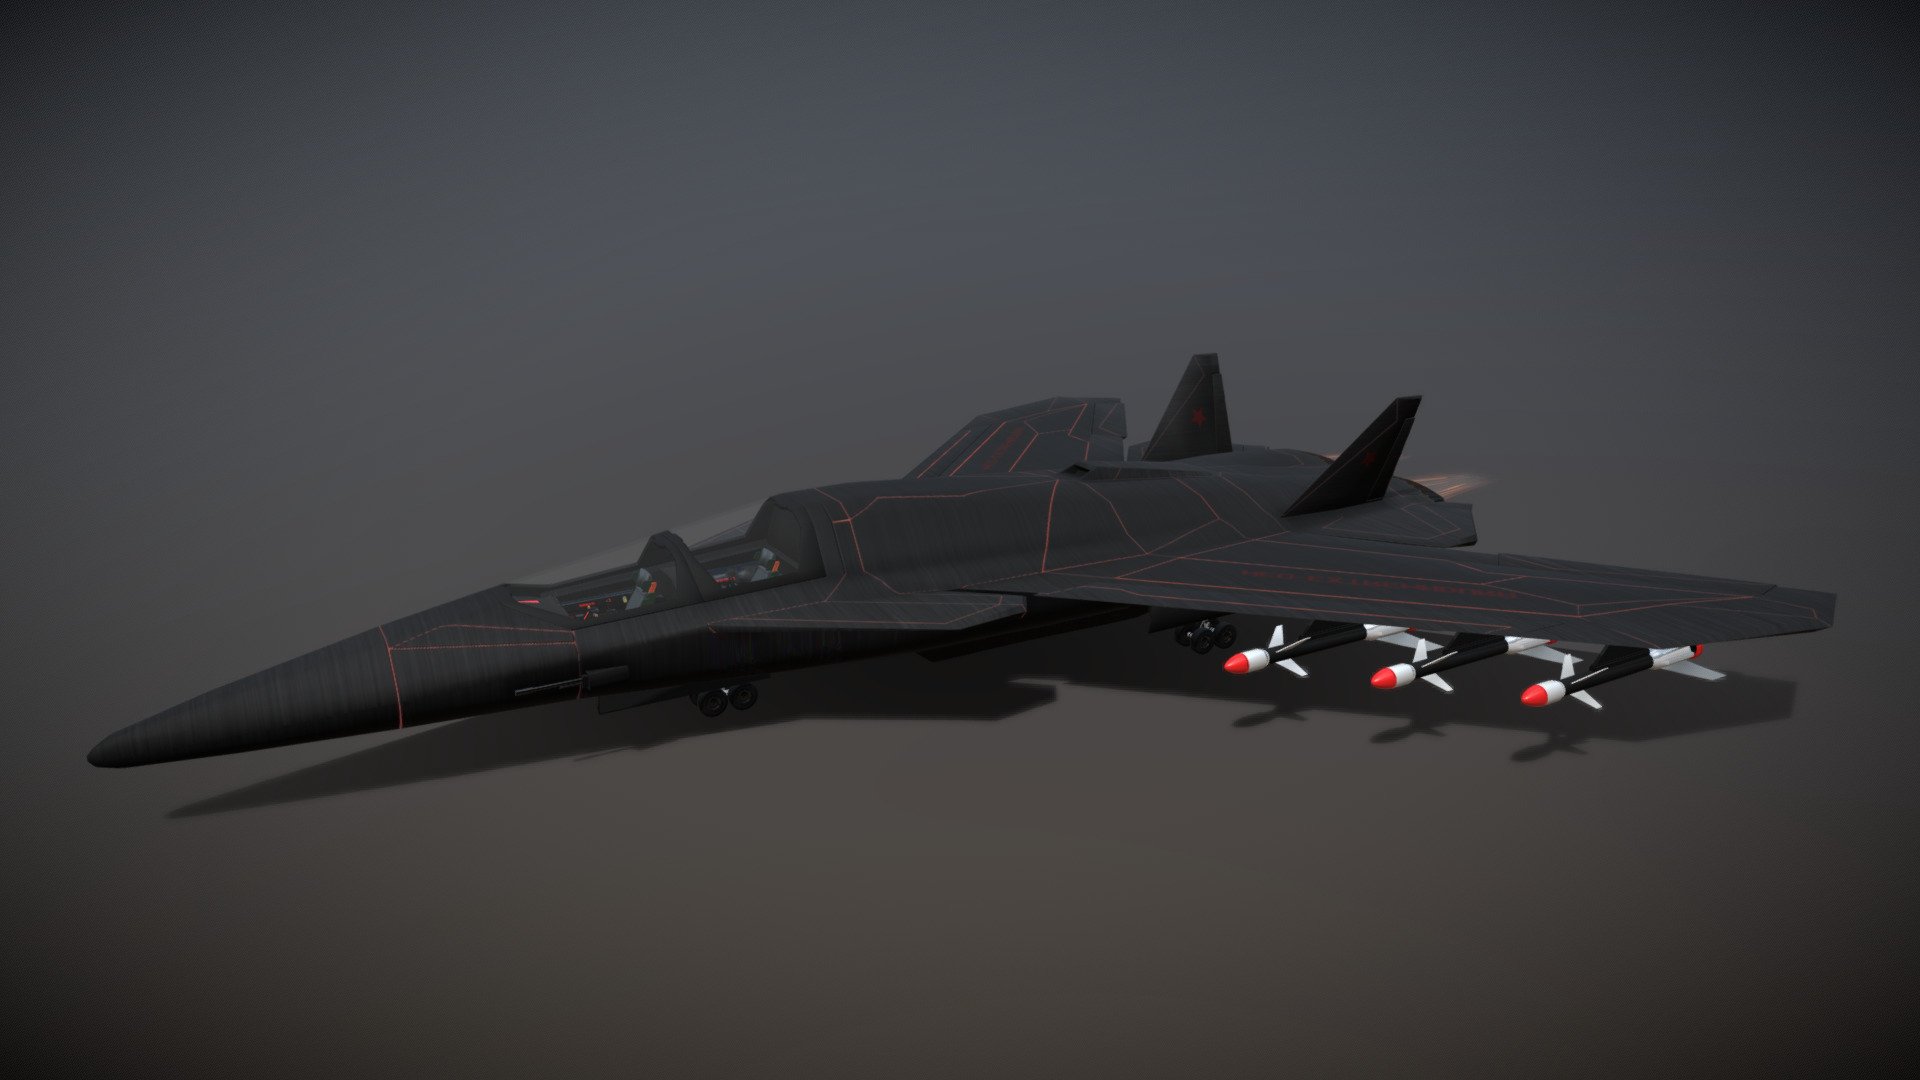 A simple unique Aircraft combat model, this model doesn't have any armature applied it, just simples empty objects parent to the mesh, to achieve the rigging process.

its textures can be summarized by:




3 images generated by AI (dreamStudio blender add-on), size 512 px, and png format.



3 images by size 1024 px which are png format (these images are original, not generated by any AI).



8 images by size 1080 px, which two of them are jpg format, and for the rest png format (these images are original, not generated by any AI).



5 images by size 2048 px, all made in png format (these images are original, not generated by any AI).



16 images by 4096 px, which nine of them are jpg format, and for the rest png format (these images are original, not generated by any AI).

this model was made in Blender software - Aircraft for combat "neo-extremadura" - Buy Royalty Free 3D model by CristianMFQ (@cristianFQ) 3d model